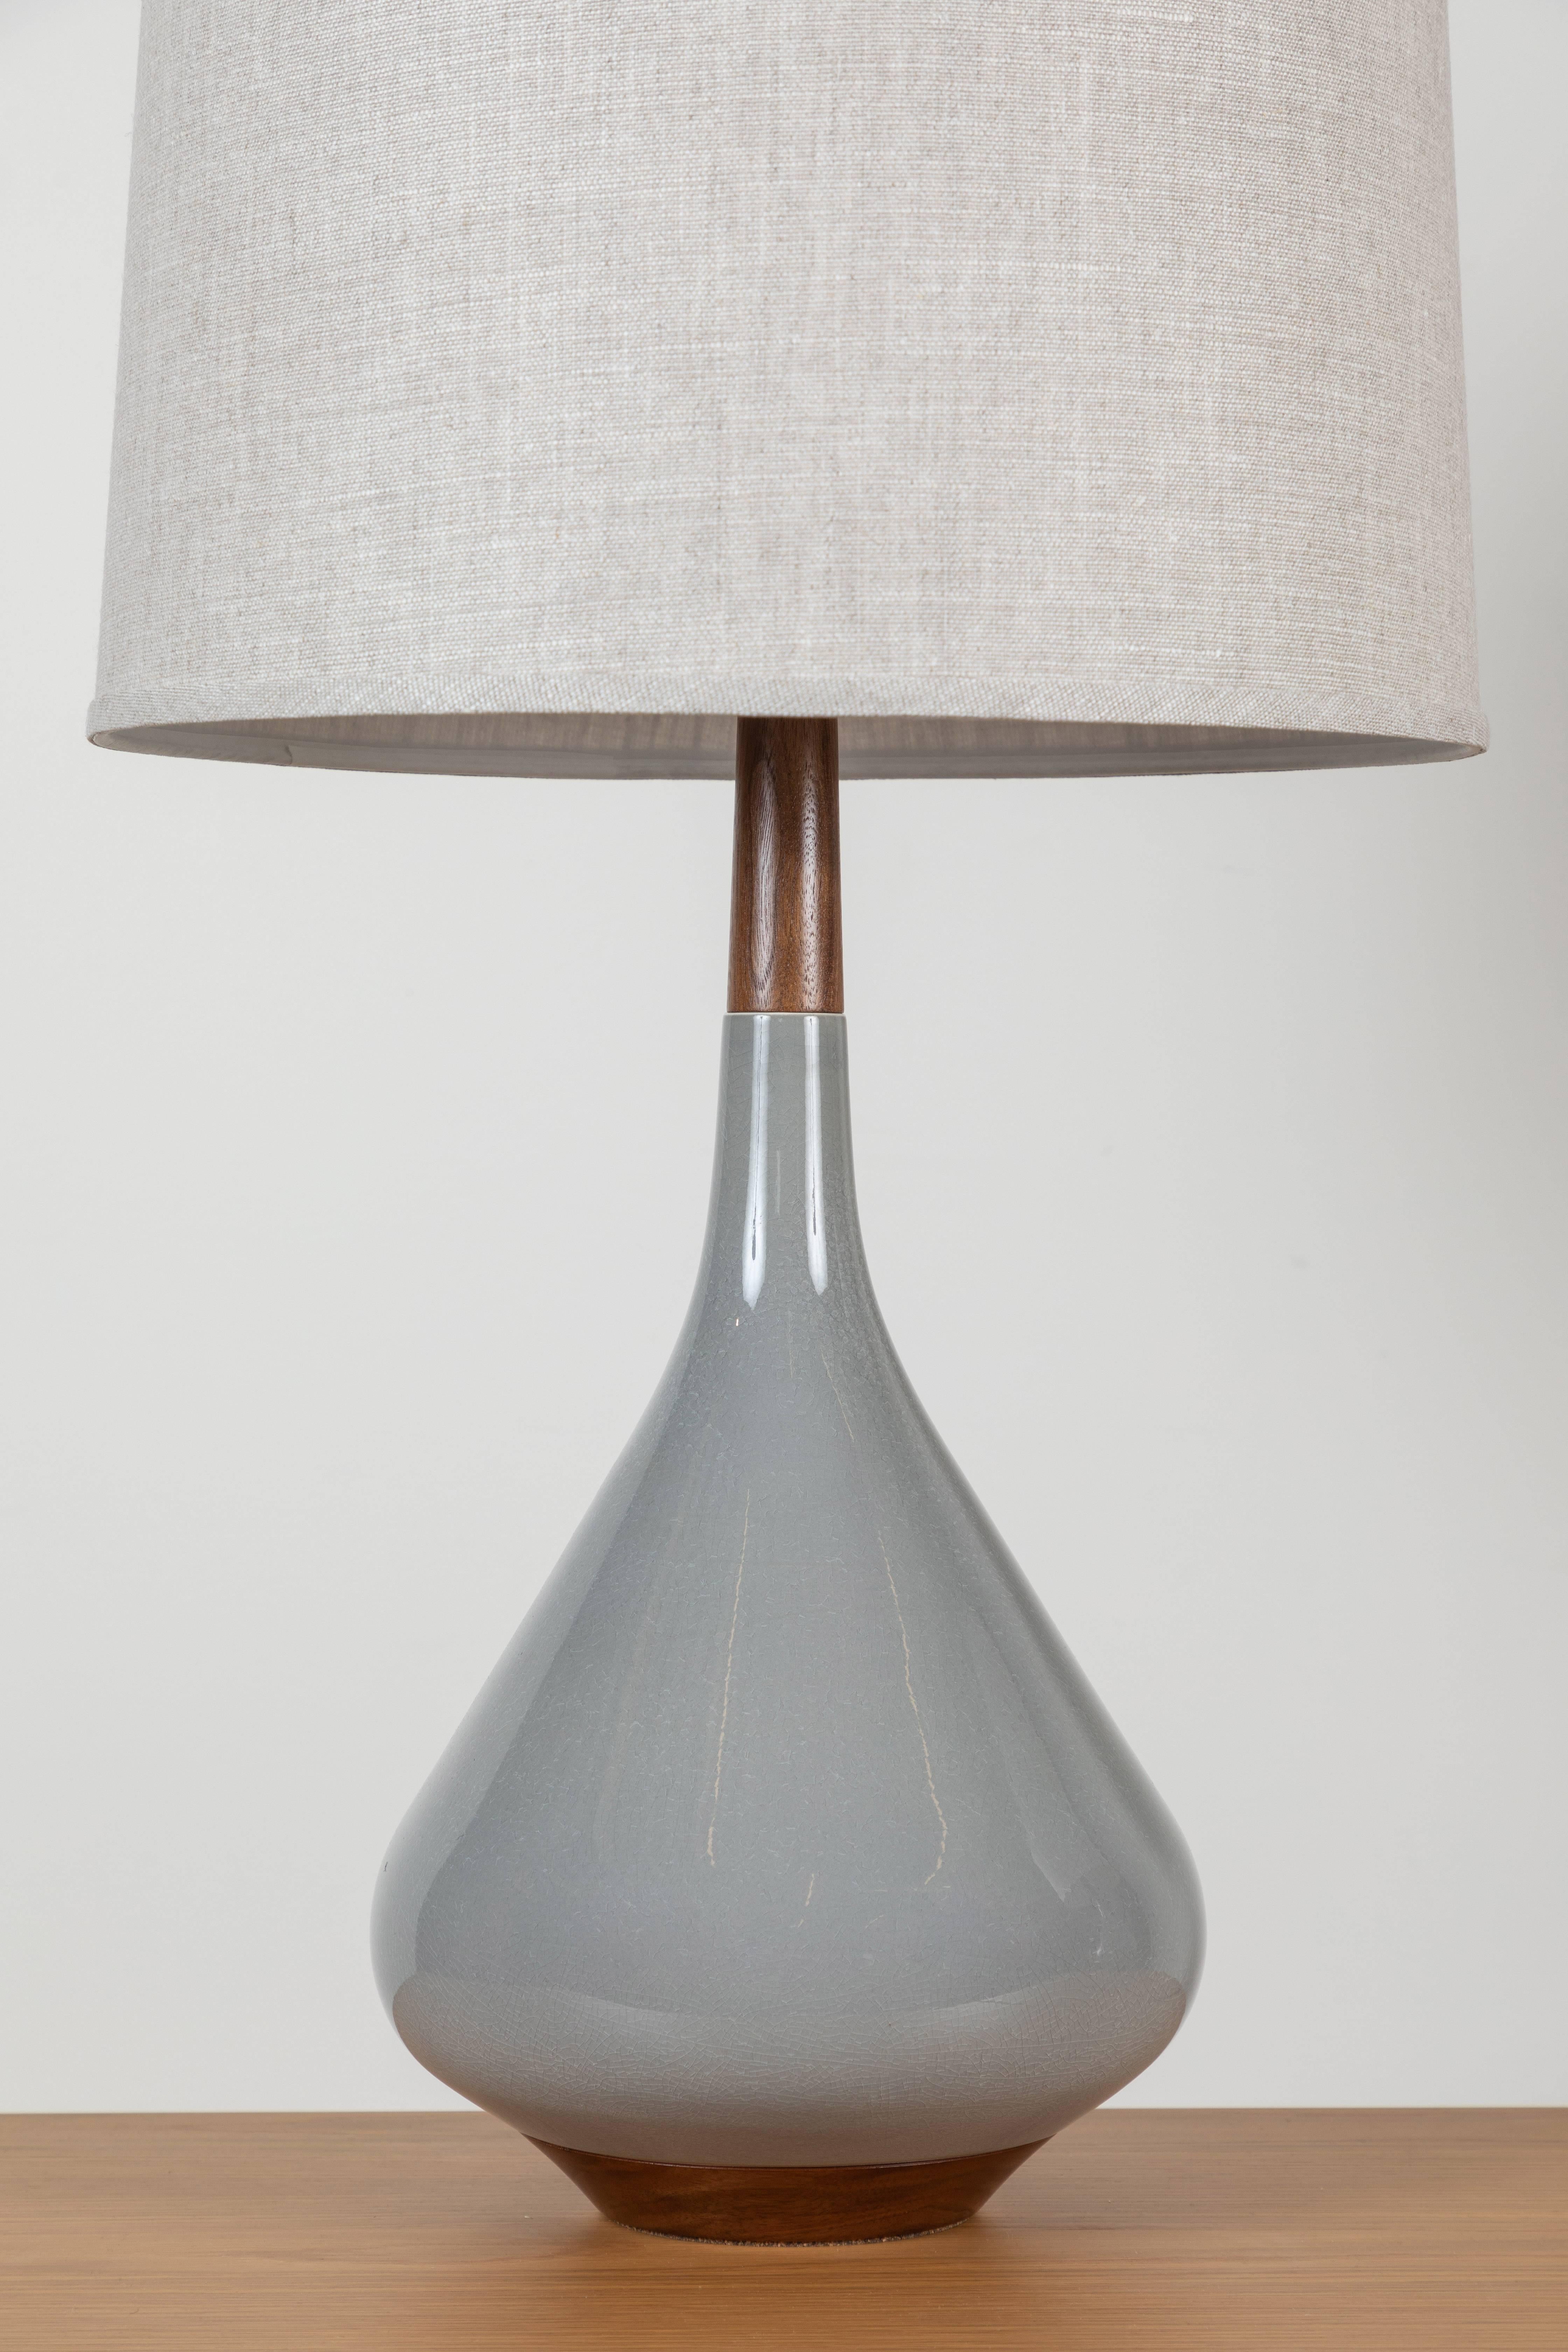 Pair of Miller Lamps by Stone and Sawyer for Lawson-Fenning.